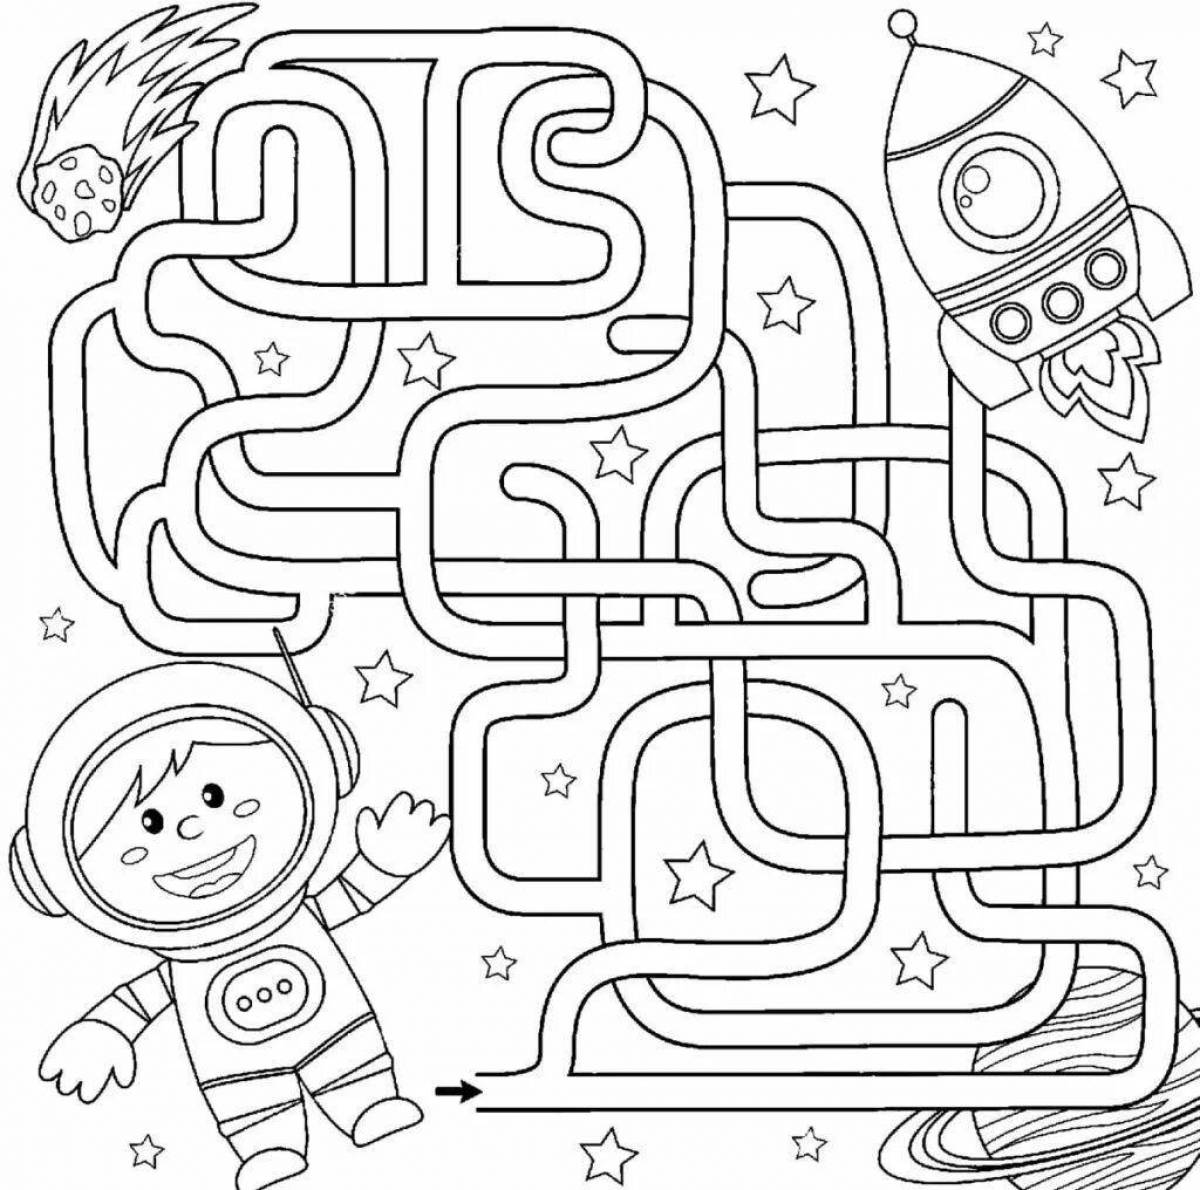 Amazing space game coloring page